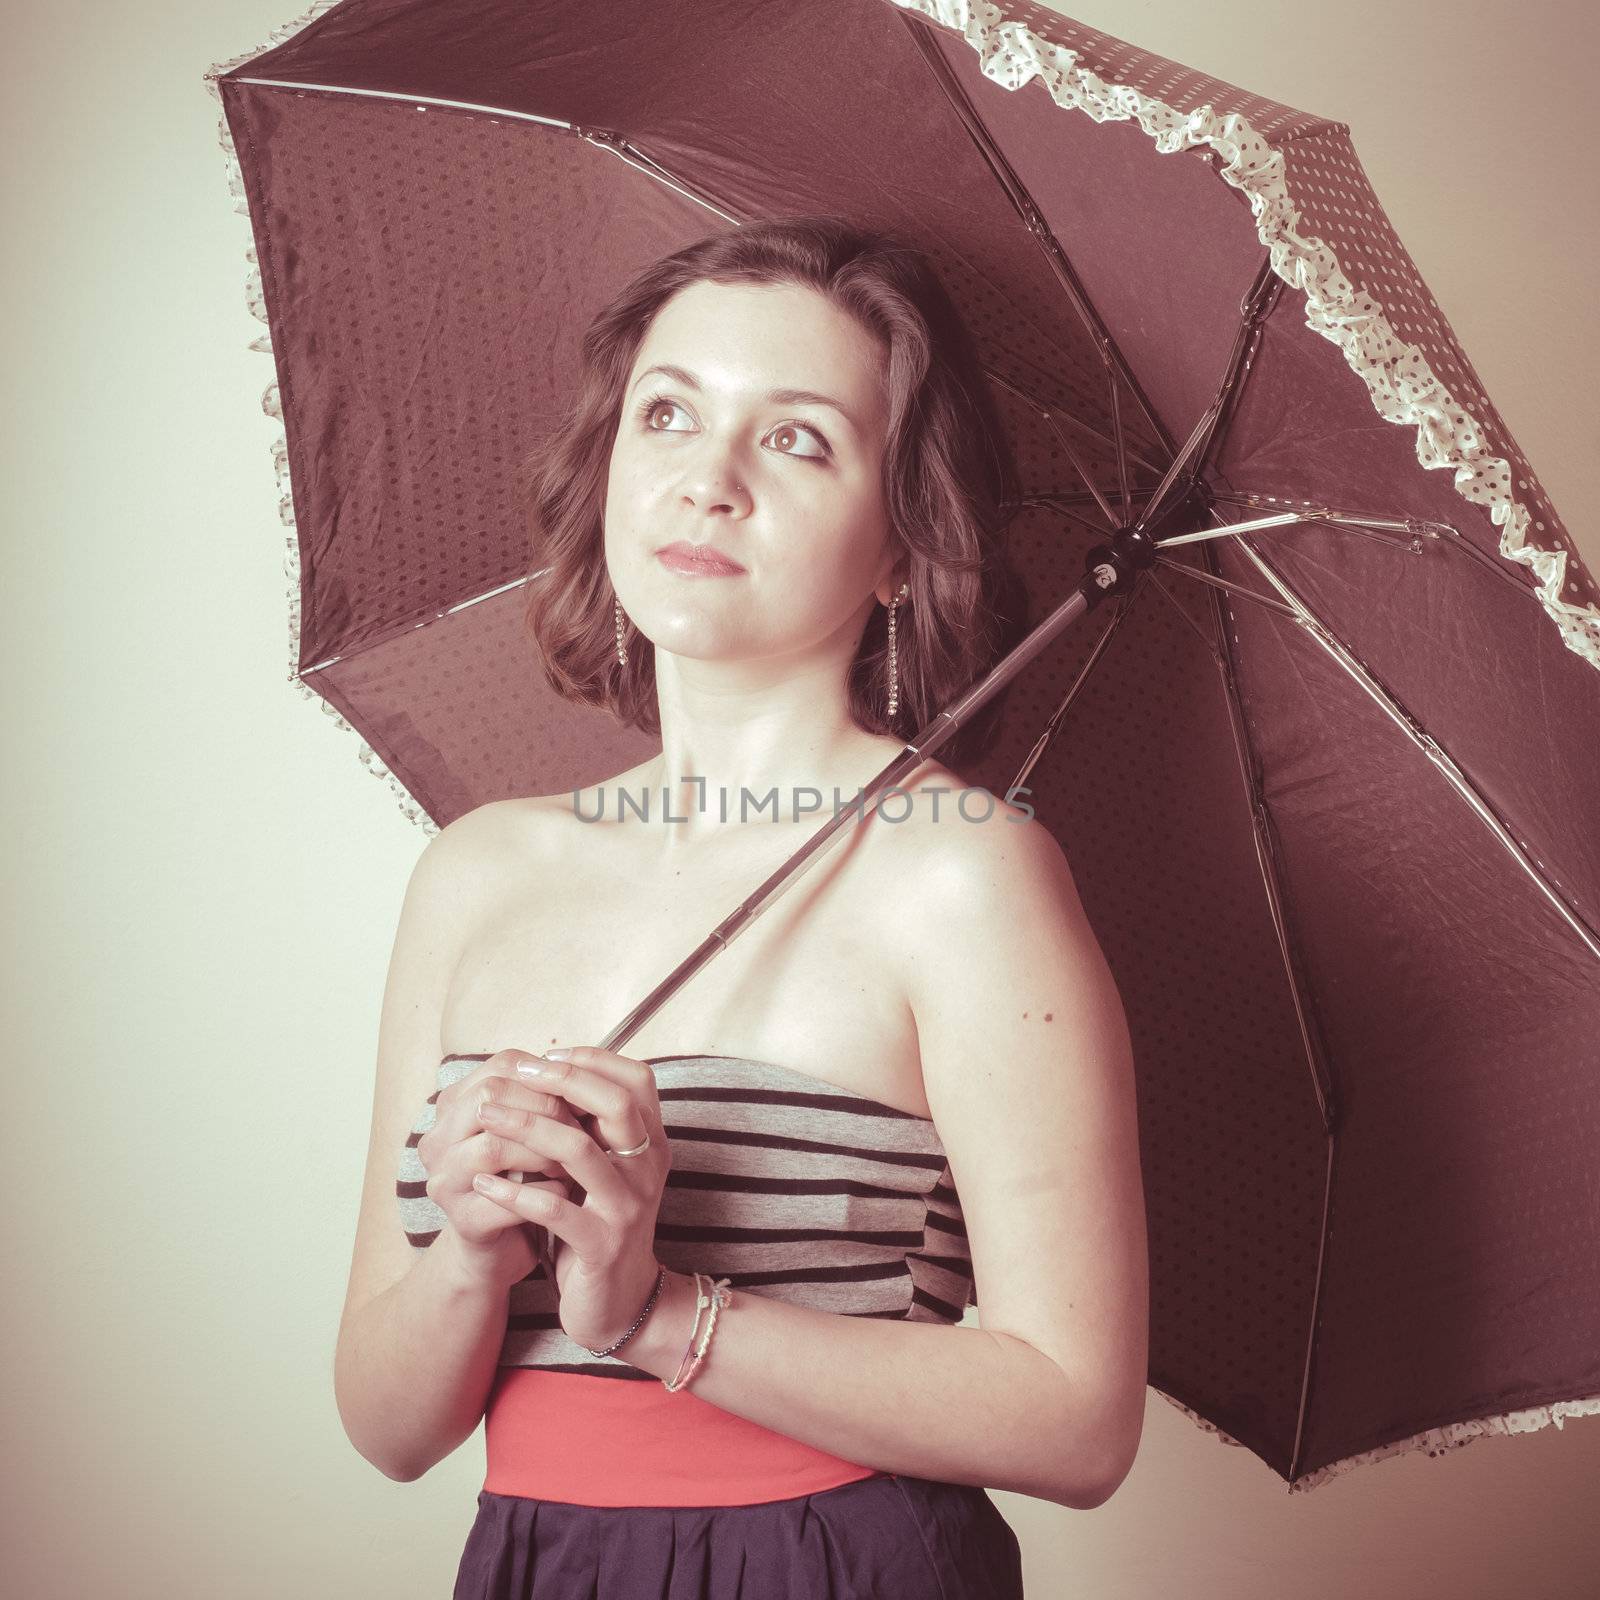 vintage portrait of young woman with umbrella on white background